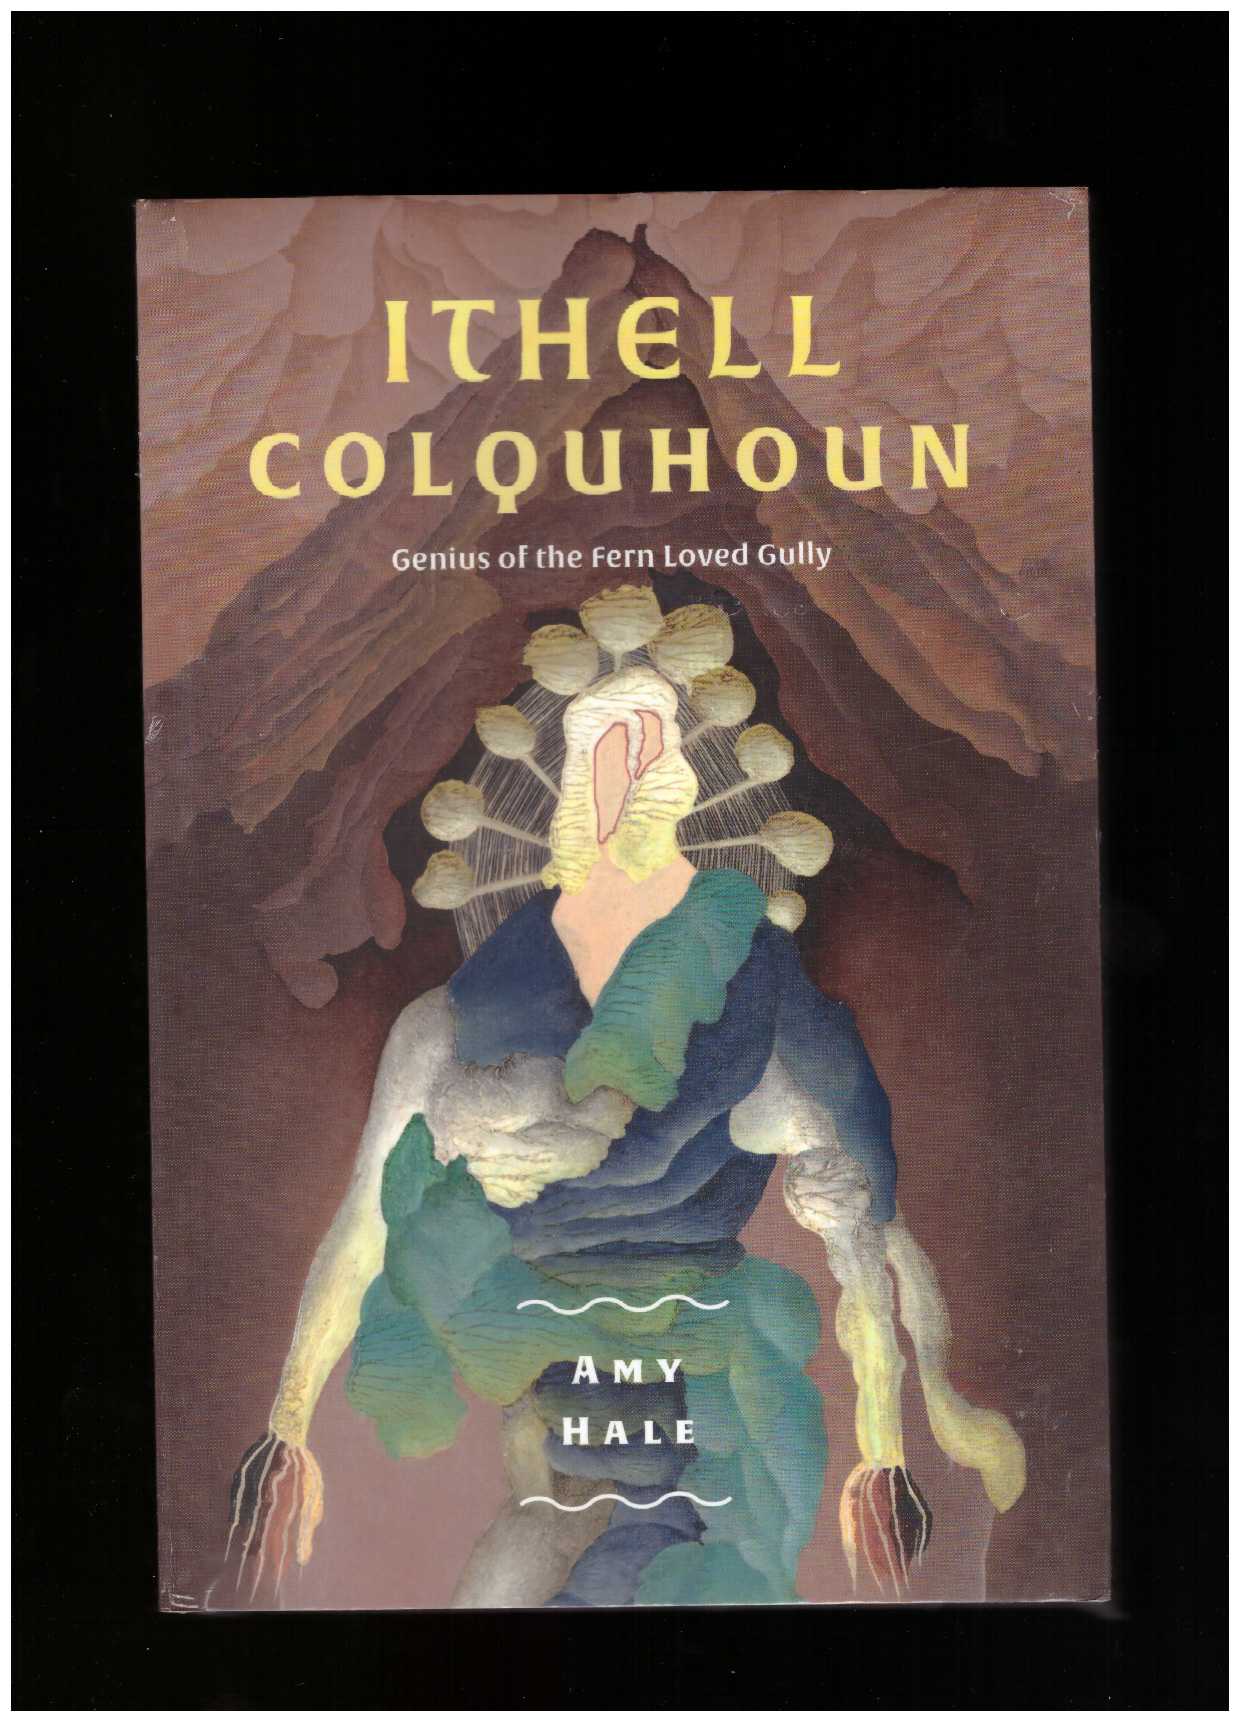 HALE, Amy - Ithell Colquhoun: Genius of The Fern Loved Gully